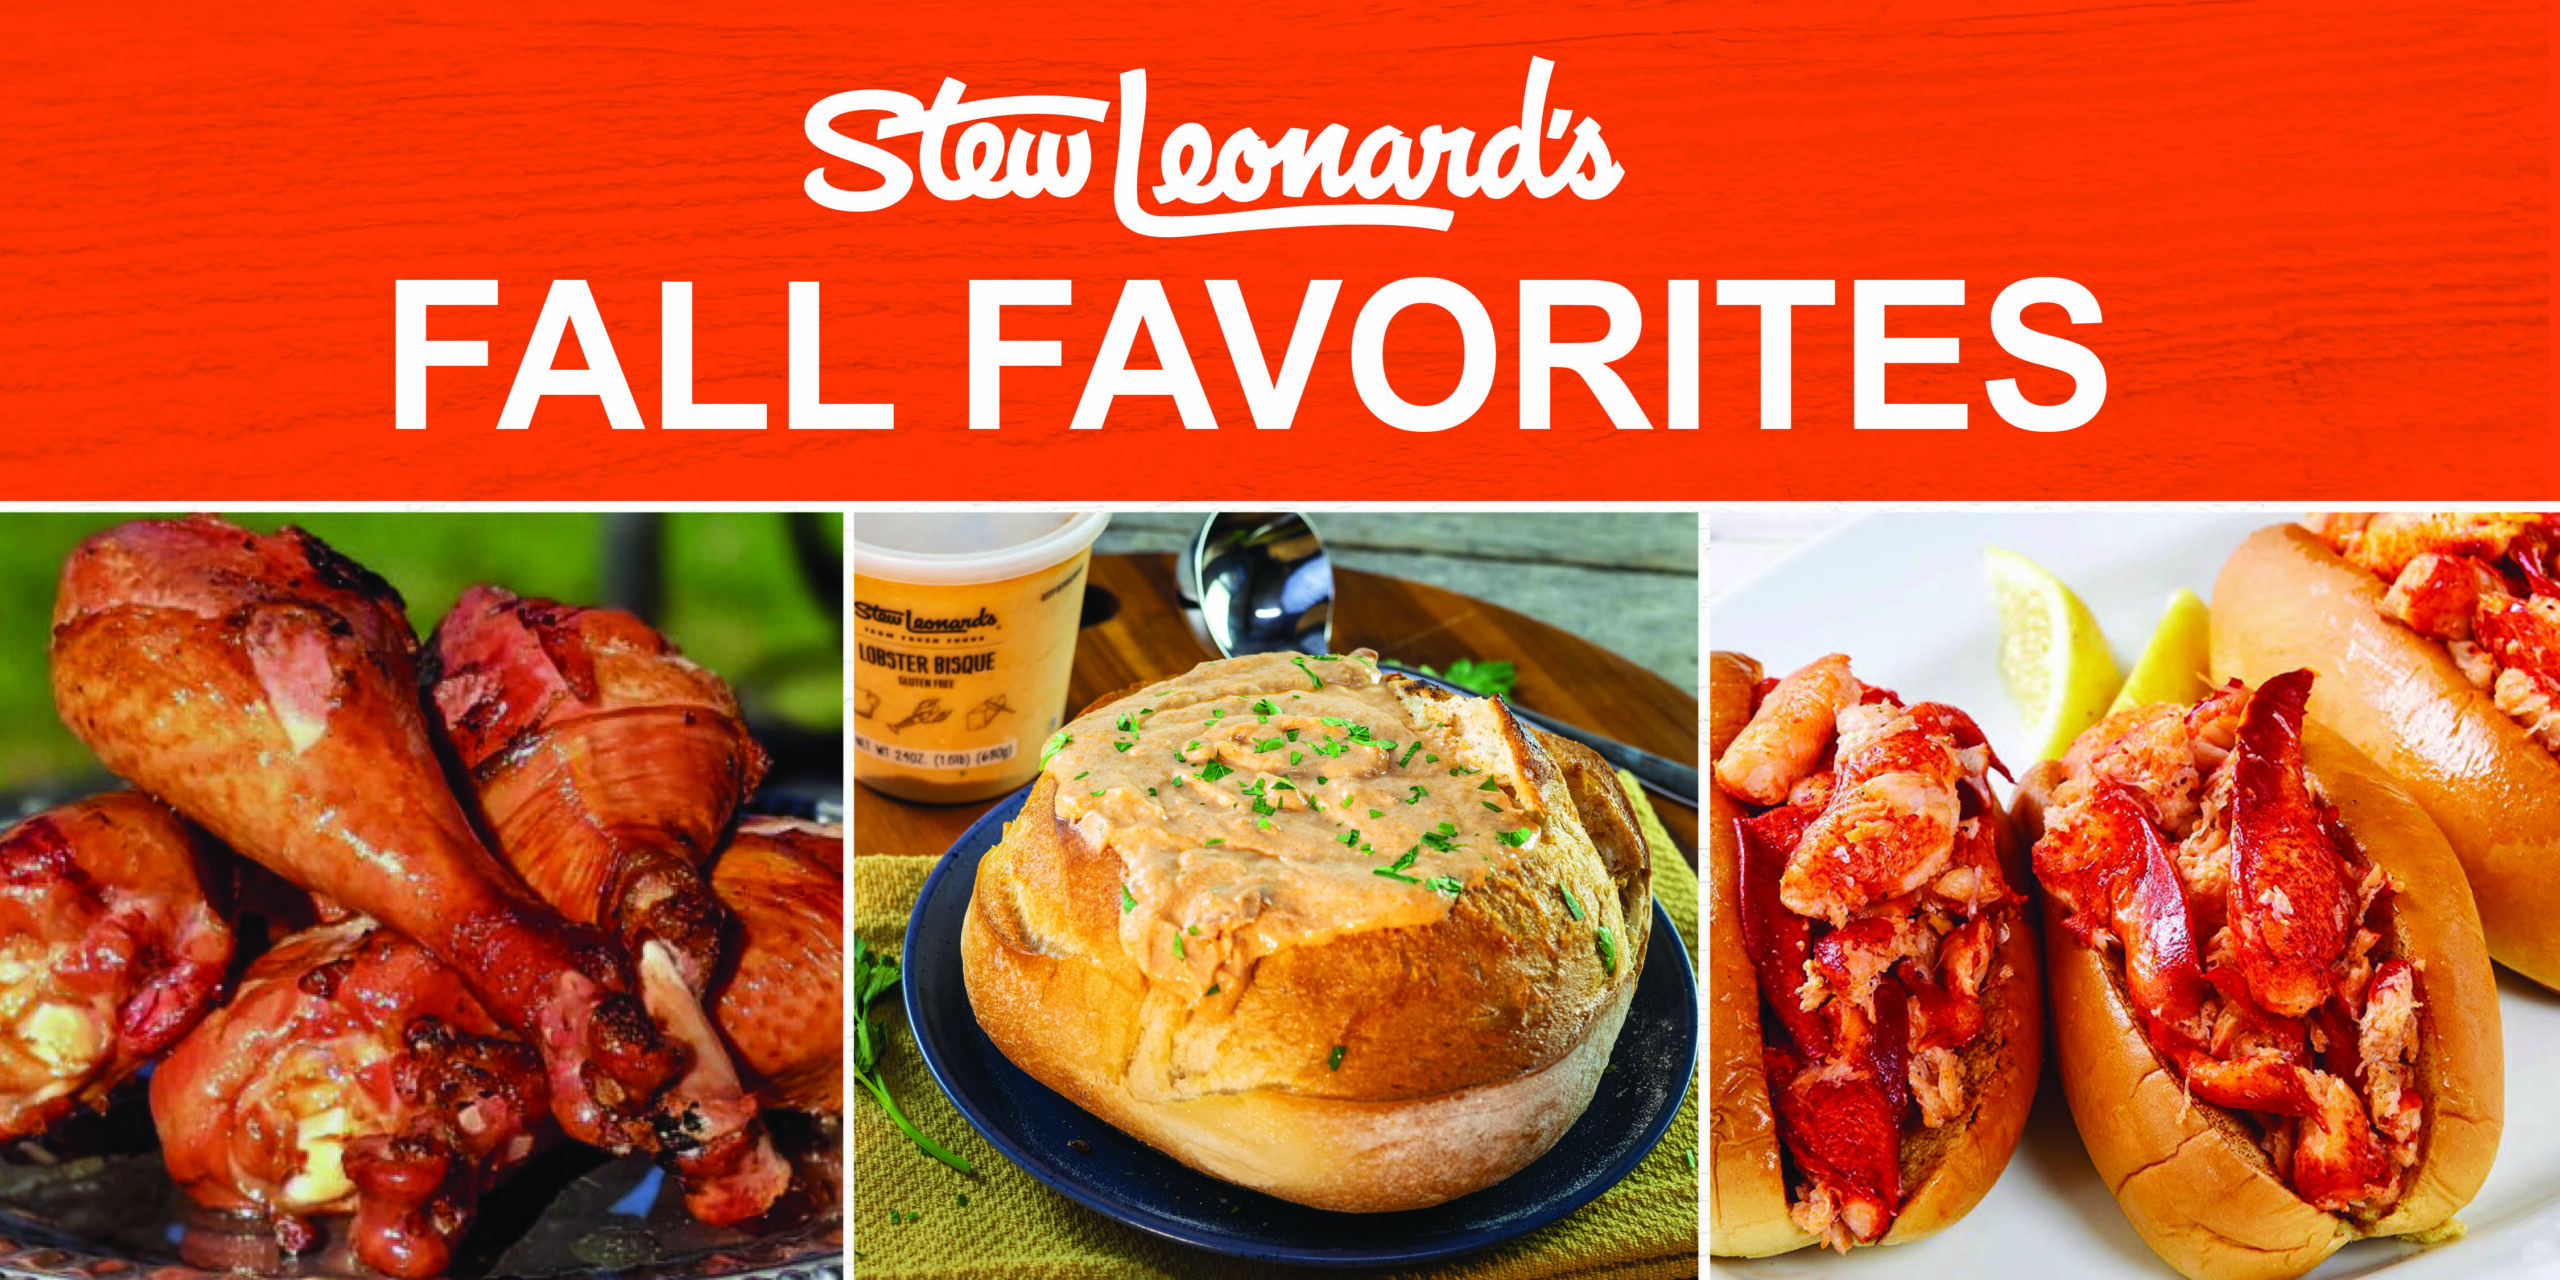 New England Fall Favorites at Stew Leonard’s in Newington